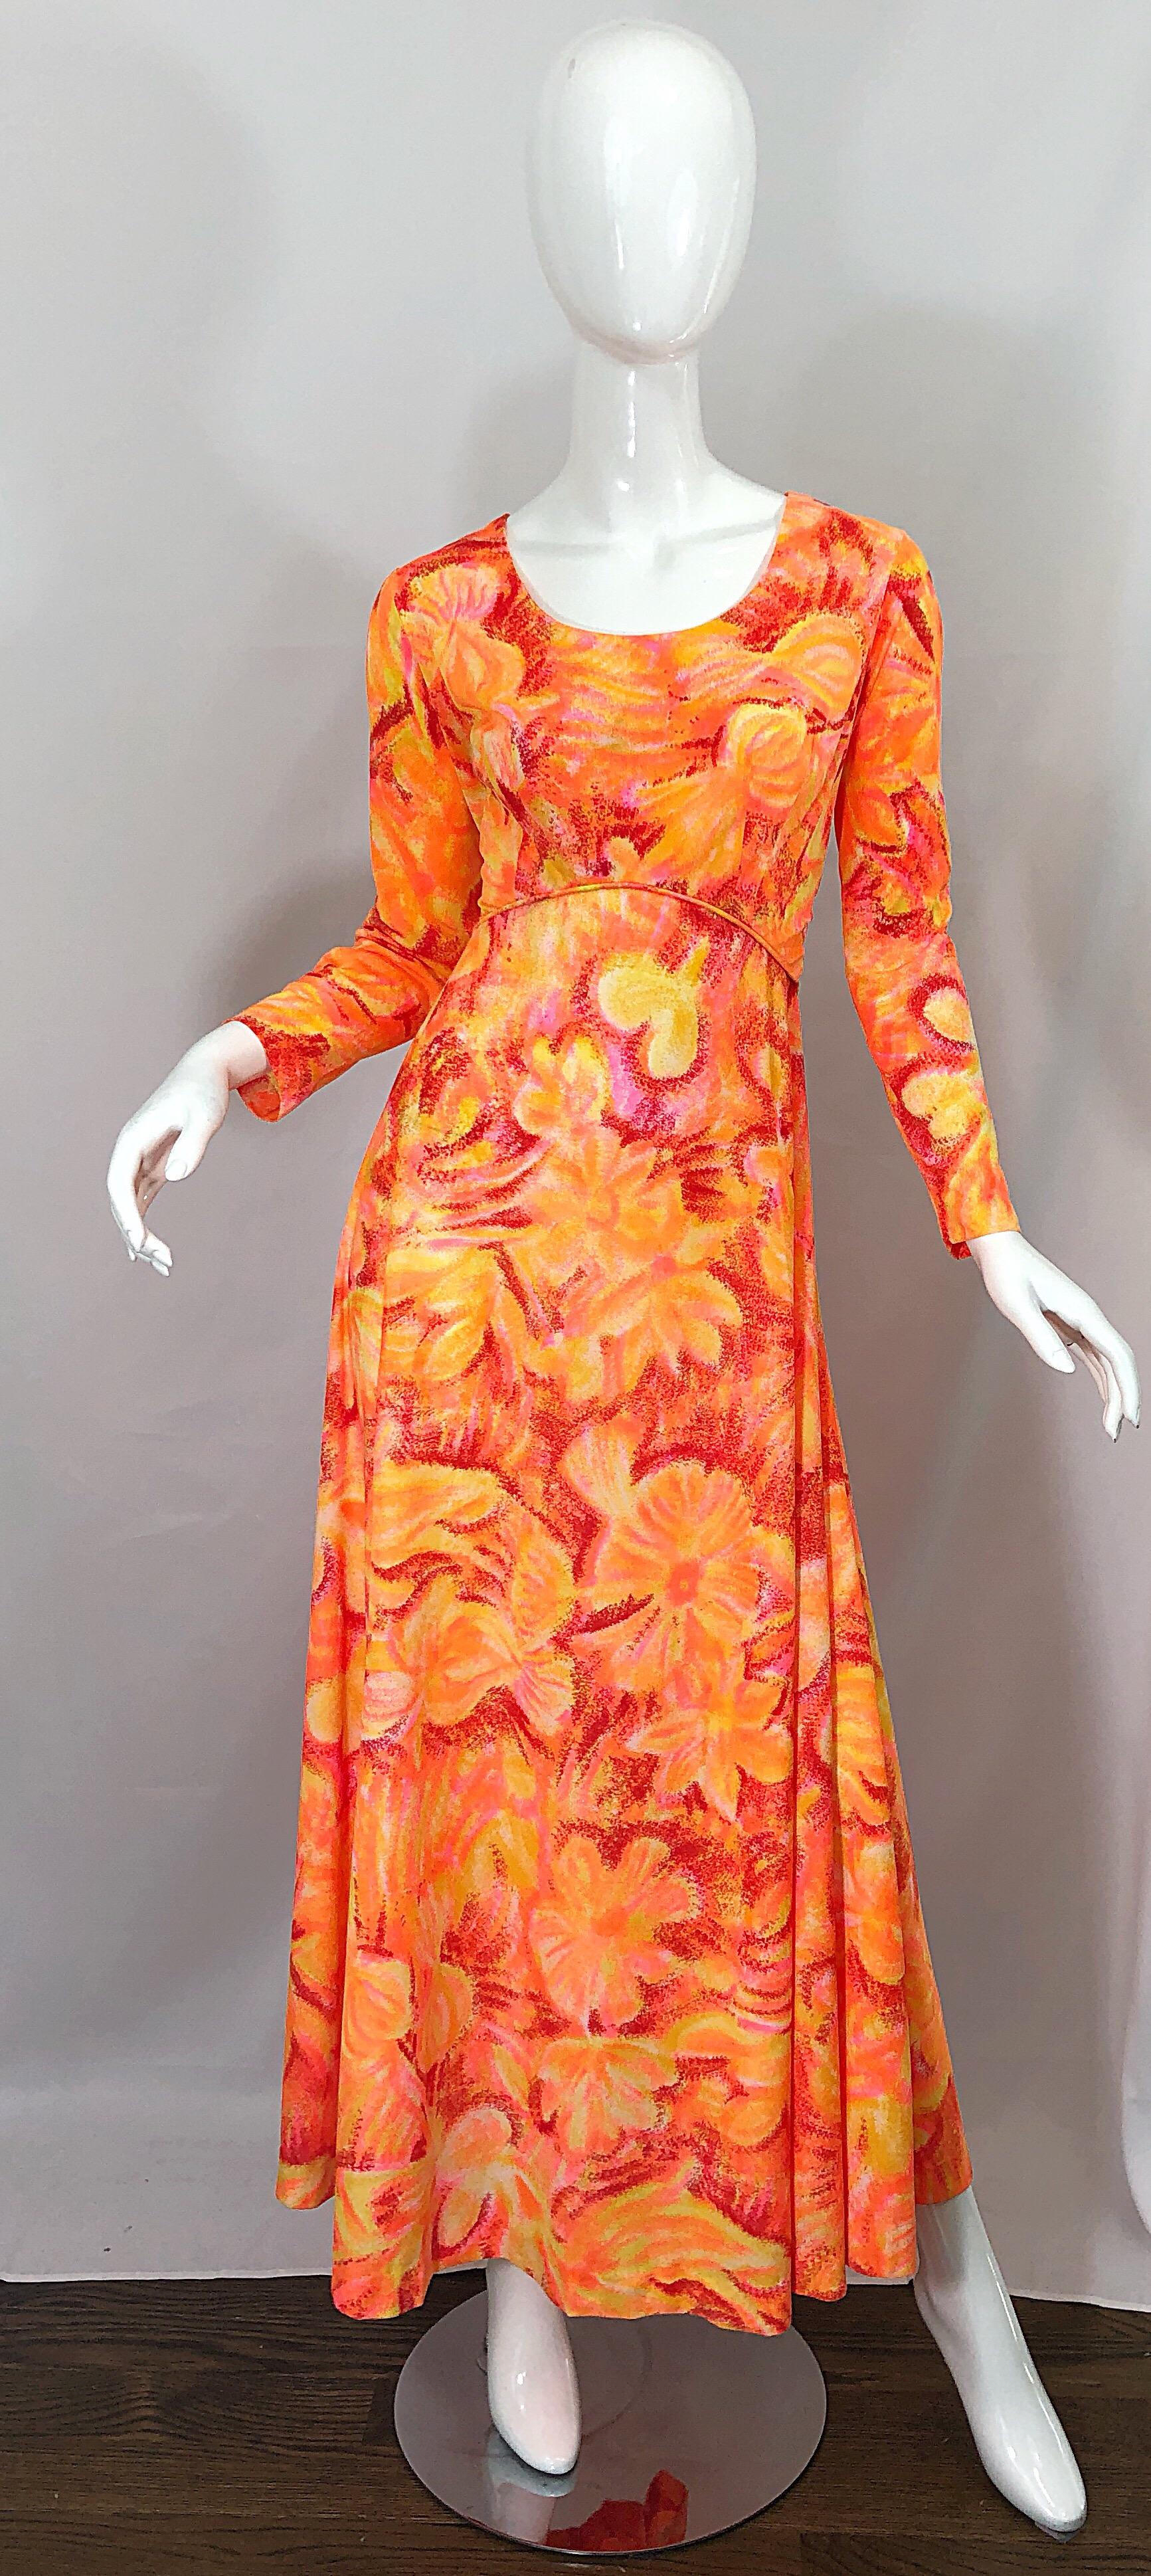 Amazing 1970s bright neon orange and hot pink abstract flower print long sleeve jersey maxi dress! Features a flattering empire waist style fit, with a fitted bodice and a free flowing full skirt. Soft nylon blend jersey fabric stretches to fit.